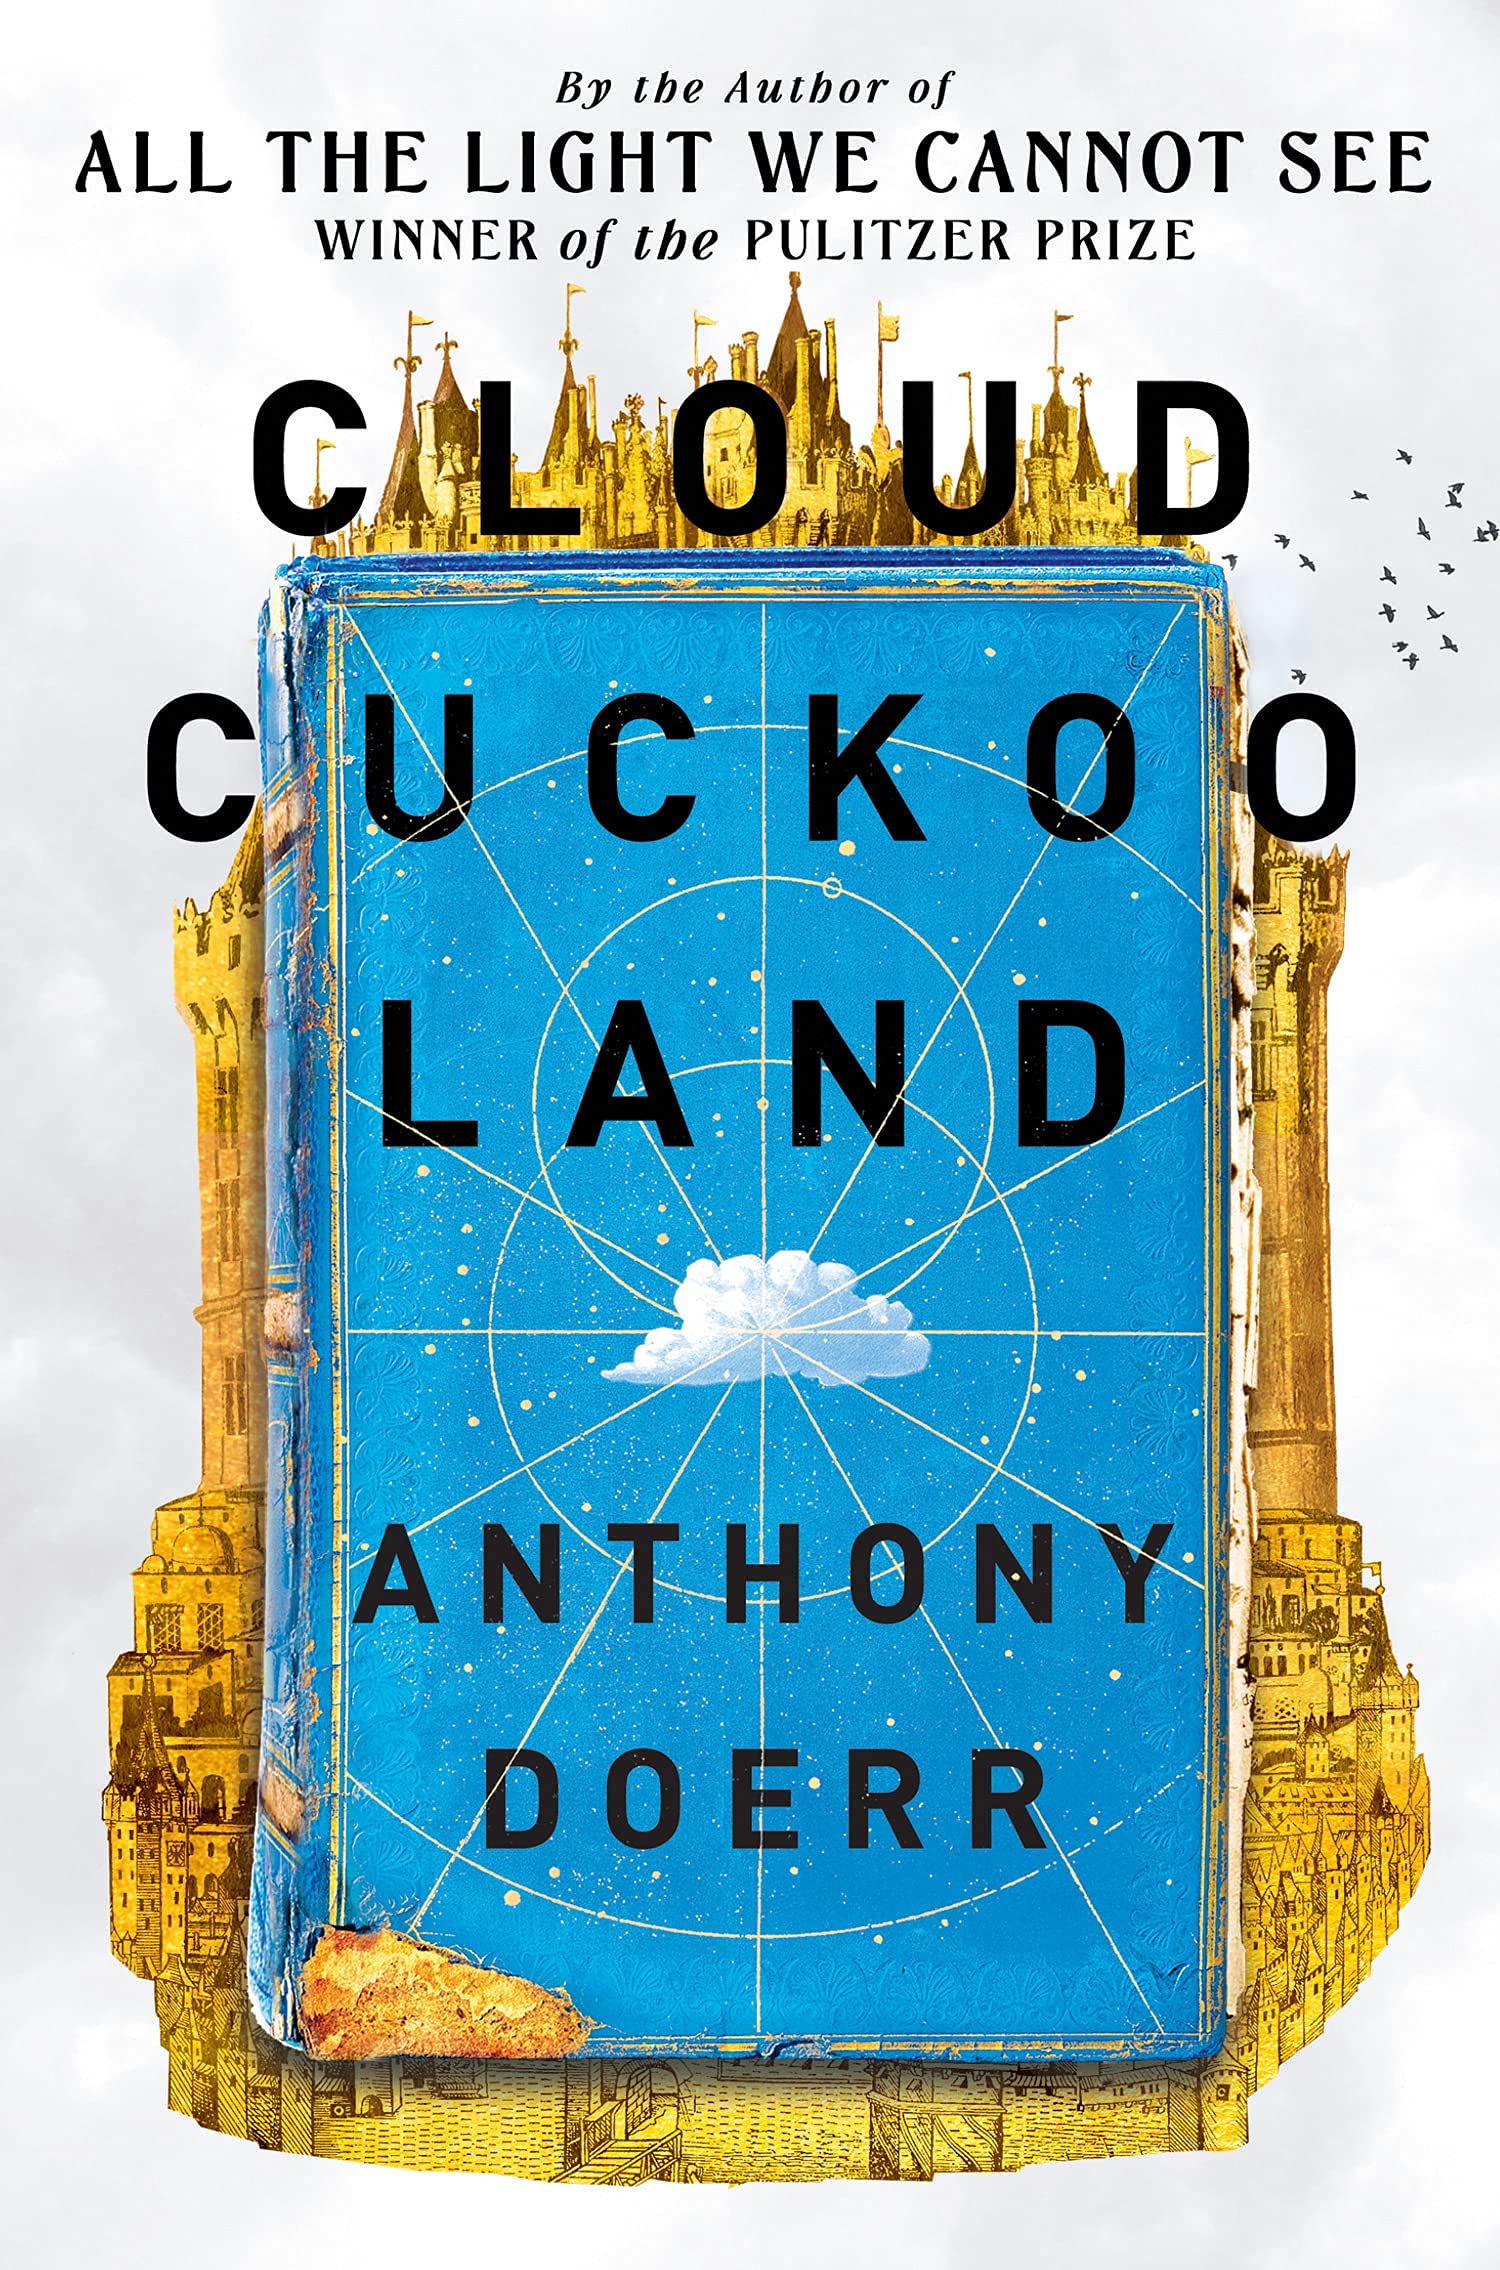 Cover art of Cloud Cuckoo Land by Anthony Doerr